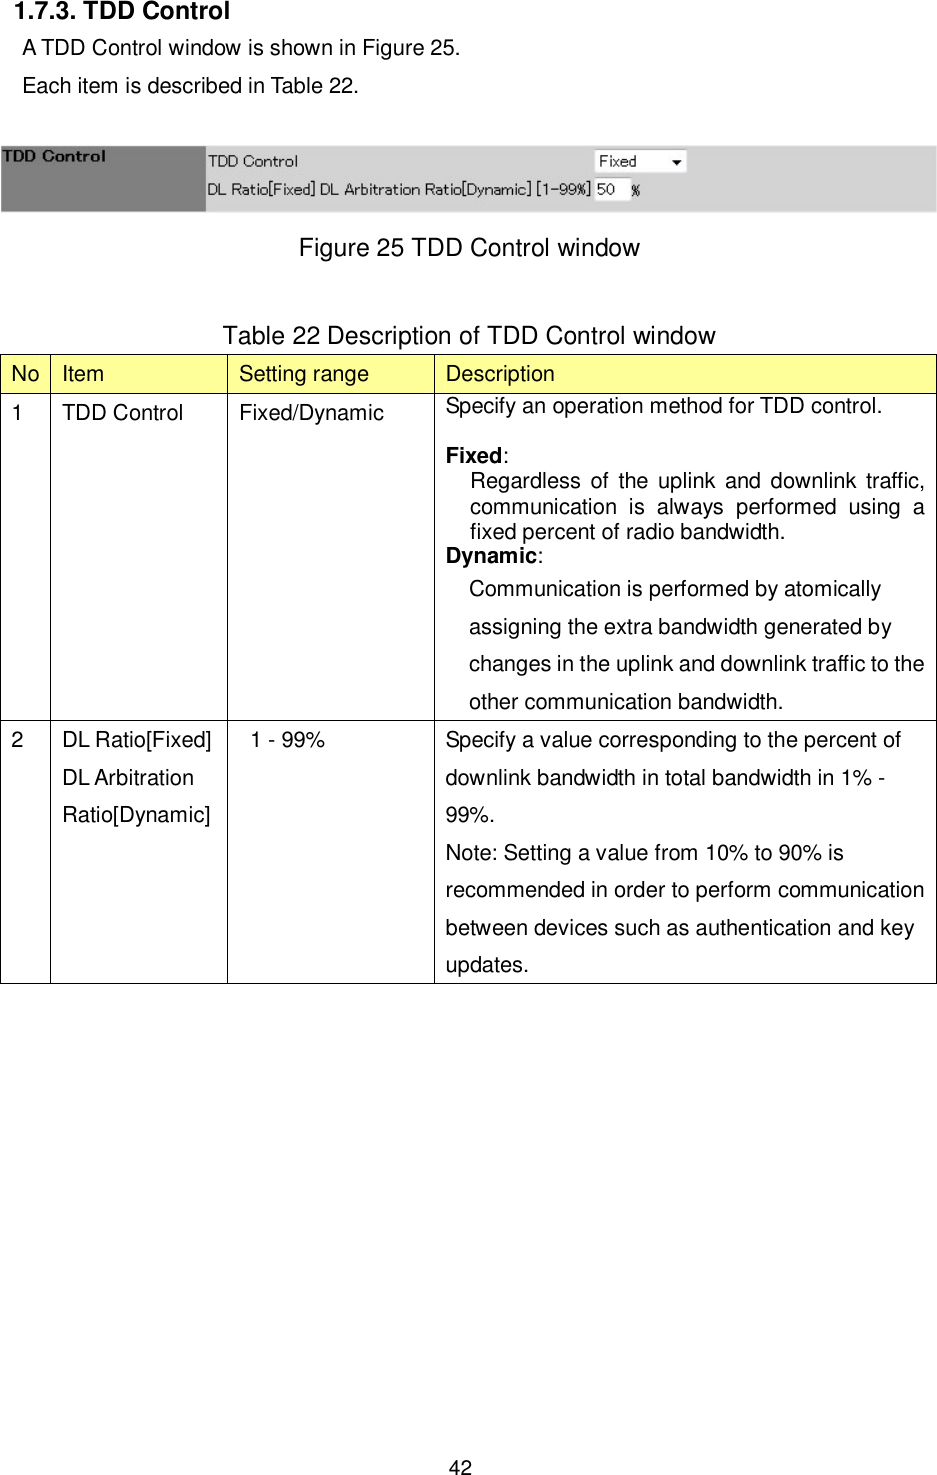    42  1.7.3. TDD Control A TDD Control window is shown in Figure 25. Each item is described in Table 22.   Figure 25 TDD Control window  Table 22 Description of TDD Control window No Item  Setting range  Description 1  TDD Control  Fixed/Dynamic  Specify an operation method for TDD control.  Fixed:   Regardless of  the uplink  and downlink traffic, communication  is  always  performed  using  a fixed percent of radio bandwidth. Dynamic:   Communication is performed by atomically assigning the extra bandwidth generated by changes in the uplink and downlink traffic to the other communication bandwidth. 2  DL Ratio[Fixed] DL Arbitration Ratio[Dynamic]   1 - 99%  Specify a value corresponding to the percent of downlink bandwidth in total bandwidth in 1% - 99%.   Note: Setting a value from 10% to 90% is recommended in order to perform communication between devices such as authentication and key updates.  